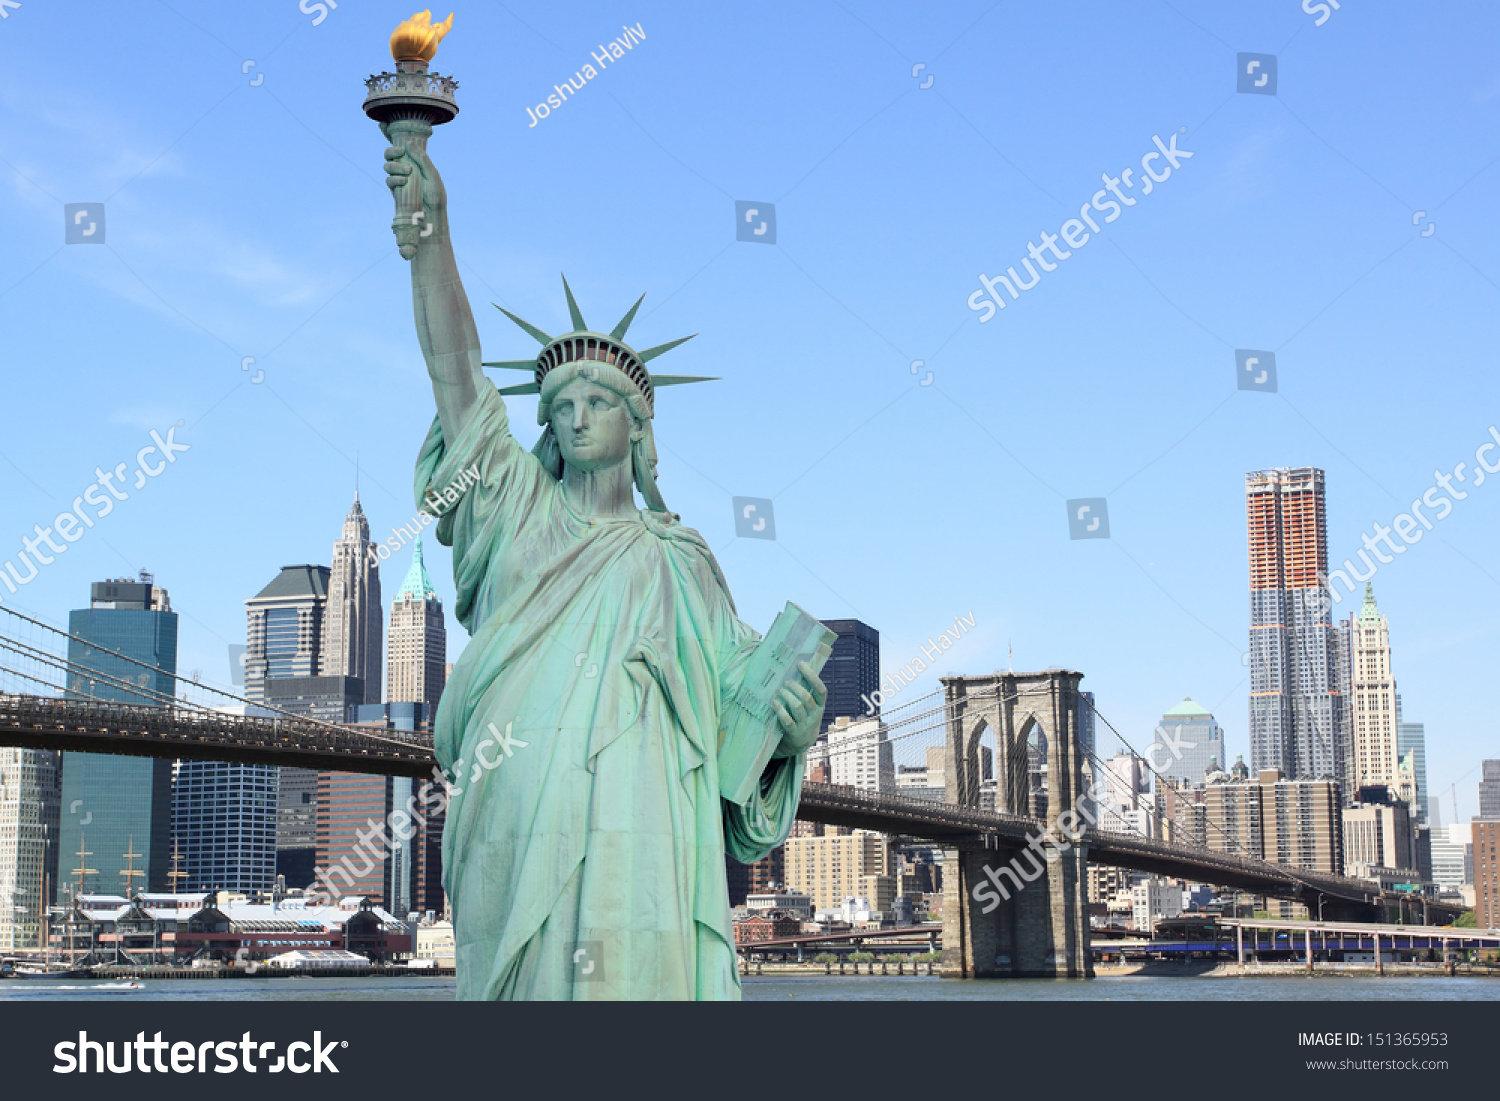 The statue of liberty and Brooklyn Bridge with New York City skyline #151365953